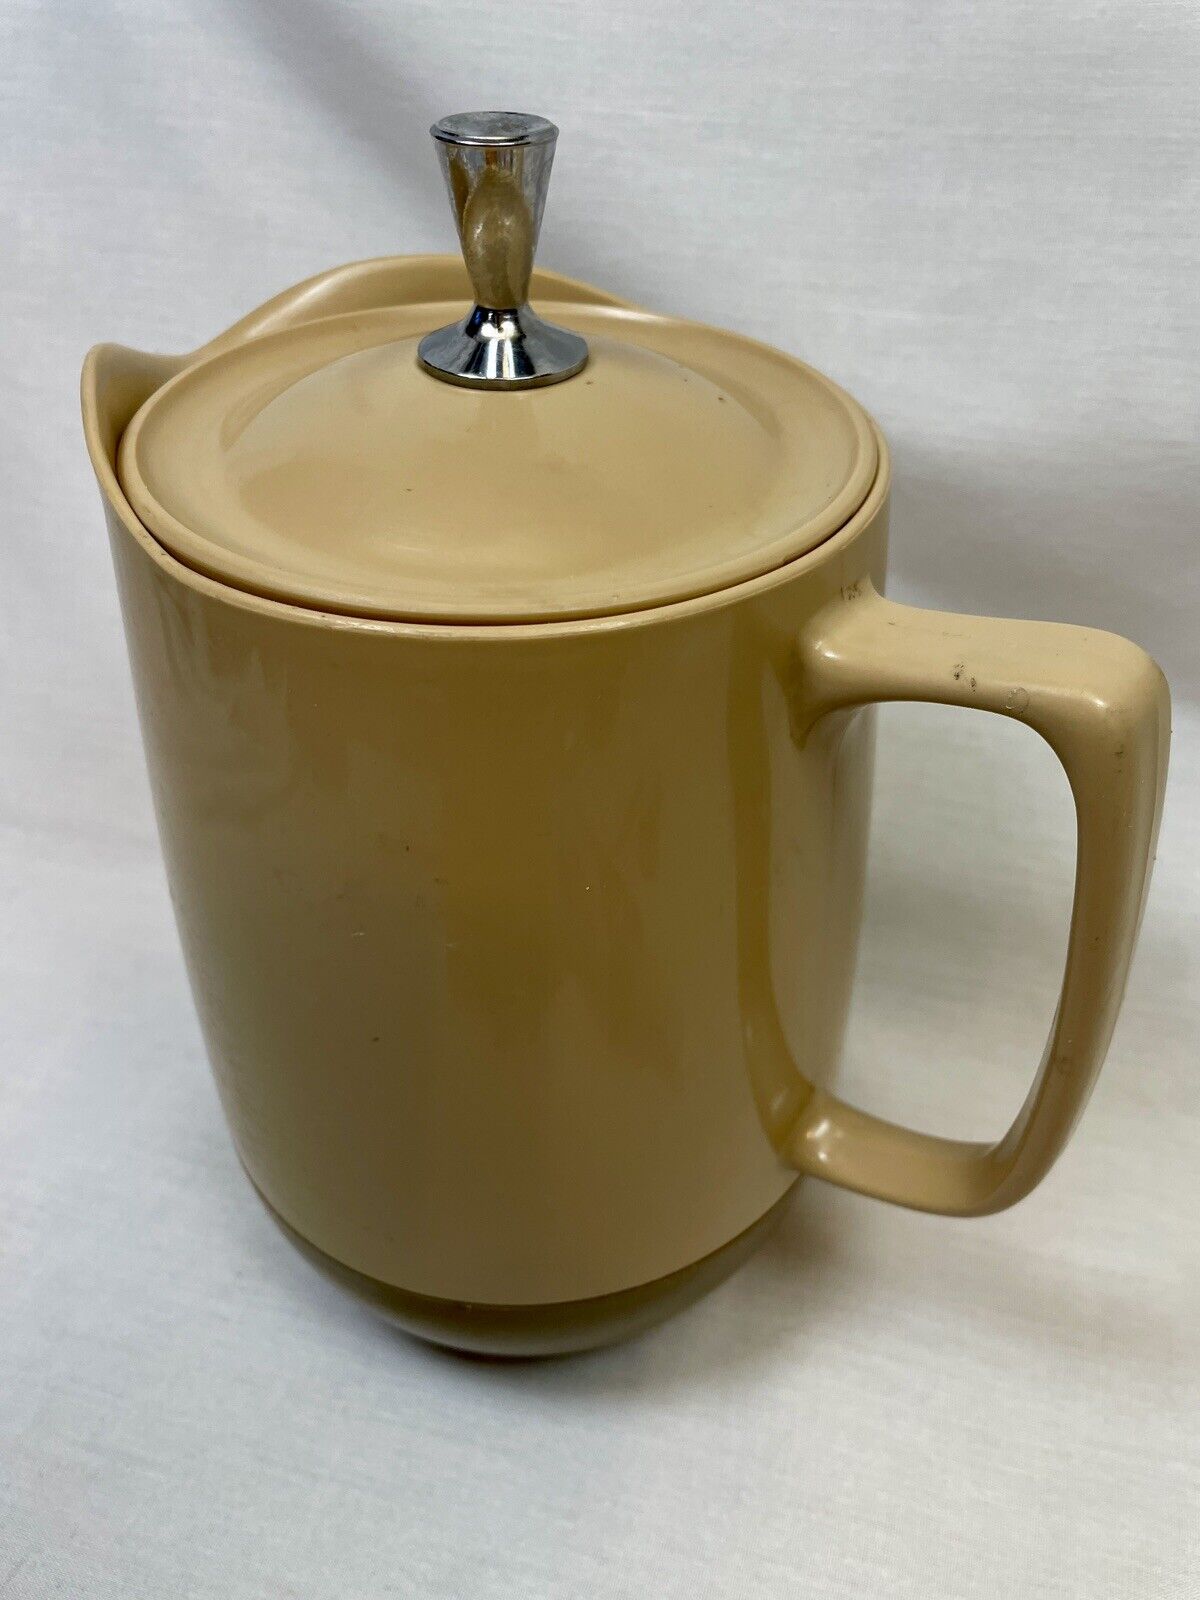 Vintage Thermos Insulated Ware Tan/Brown Pitcher - King-Seeley Thermos Co.